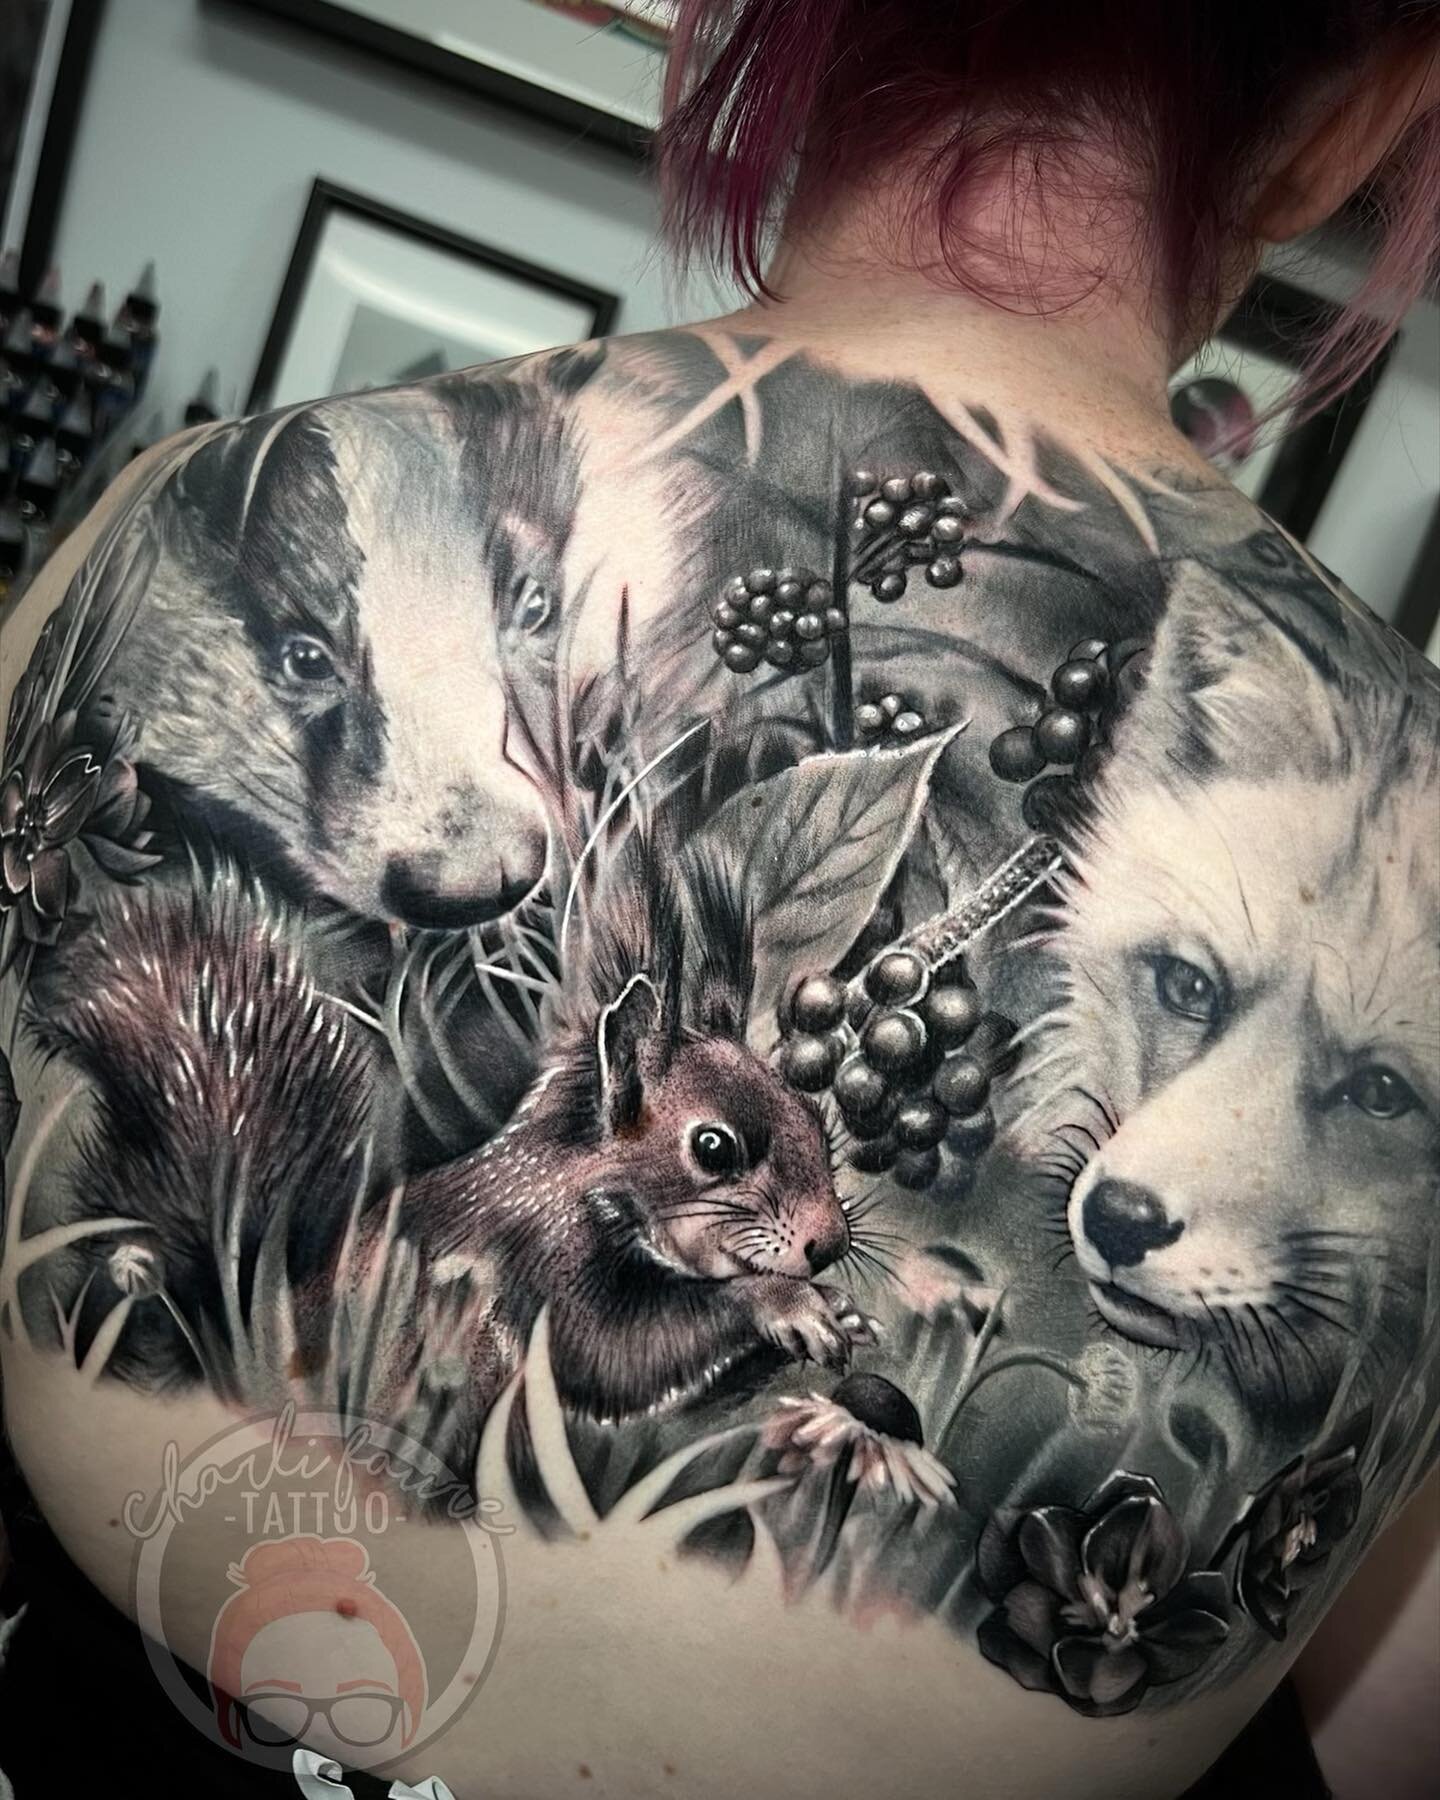 Can&rsquo;t thank Meg enough for the opportunity and pleasure of doing this big tattoo project for her. A beautiful nod to her British heritage with these native animals and florals. There&rsquo;s a few cover ups in here, a feather on the left, dande